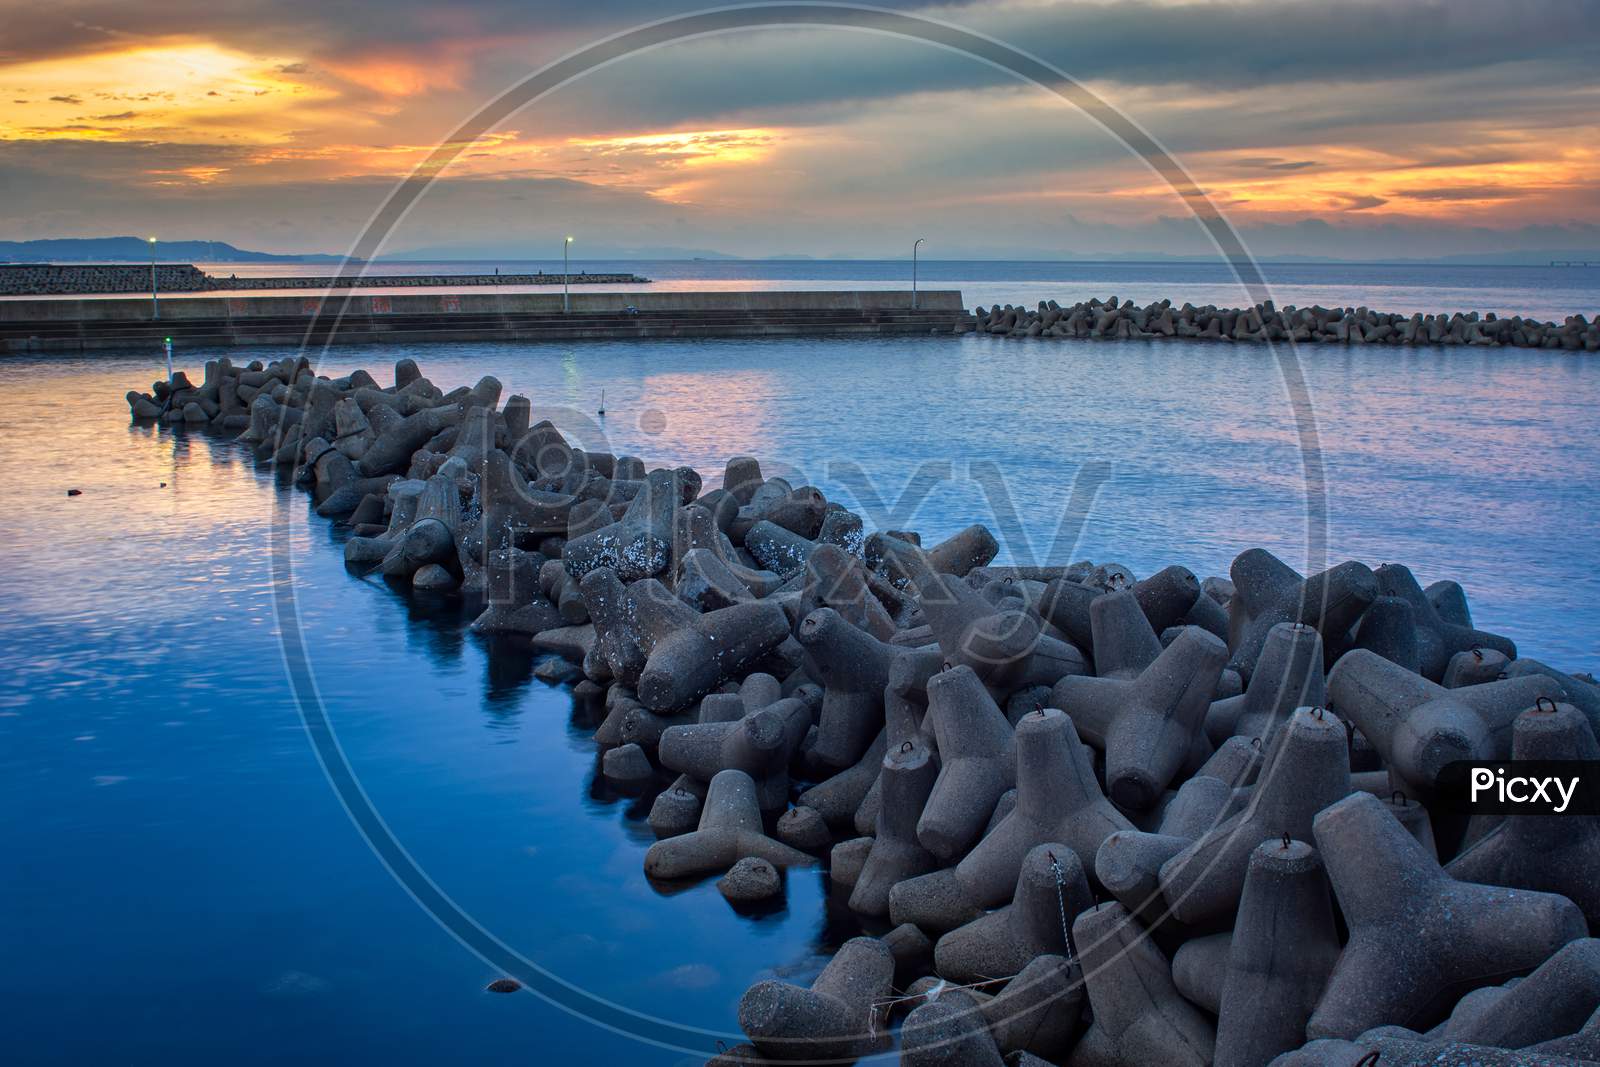 Beautiful View Of A Seascape With Tetrapod Breakwaters Under The Sunset Sky